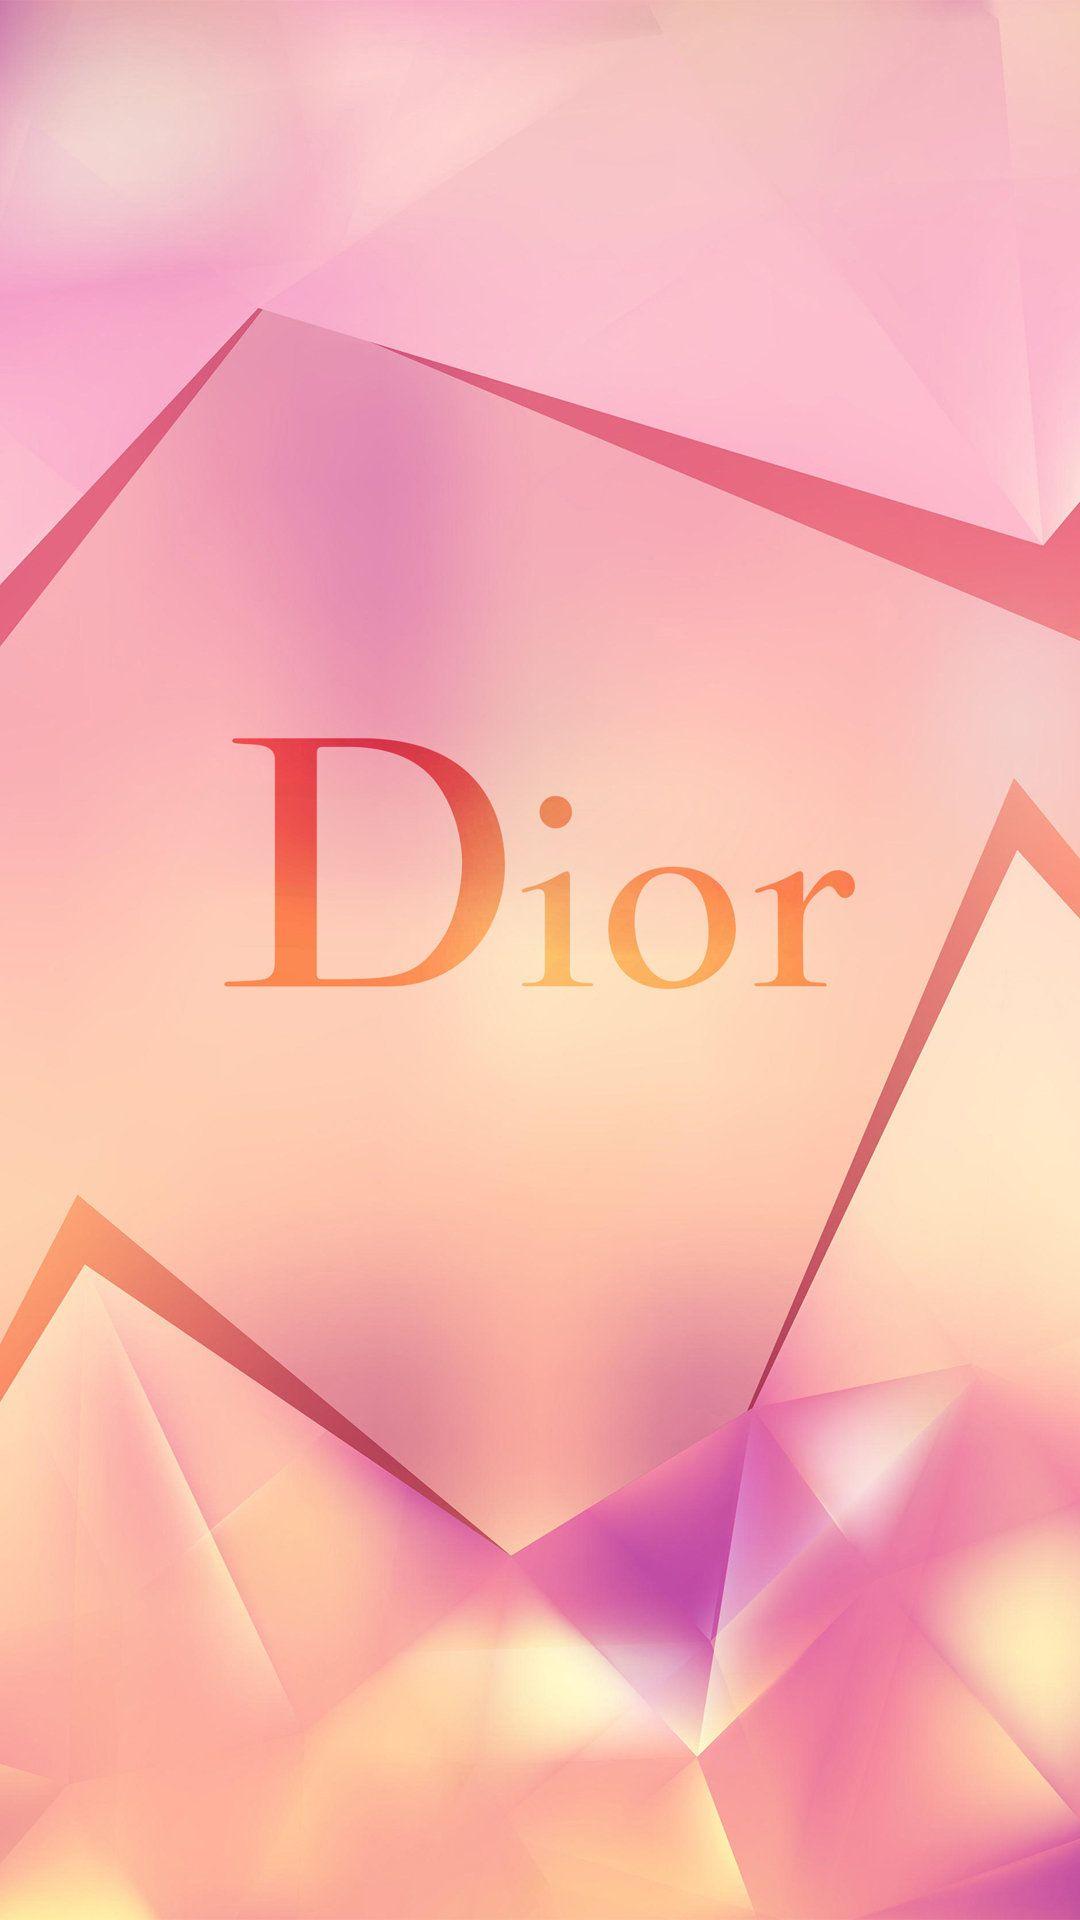 Dior Phone Wallpapers - Top Free Dior Phone Backgrounds - WallpaperAccess